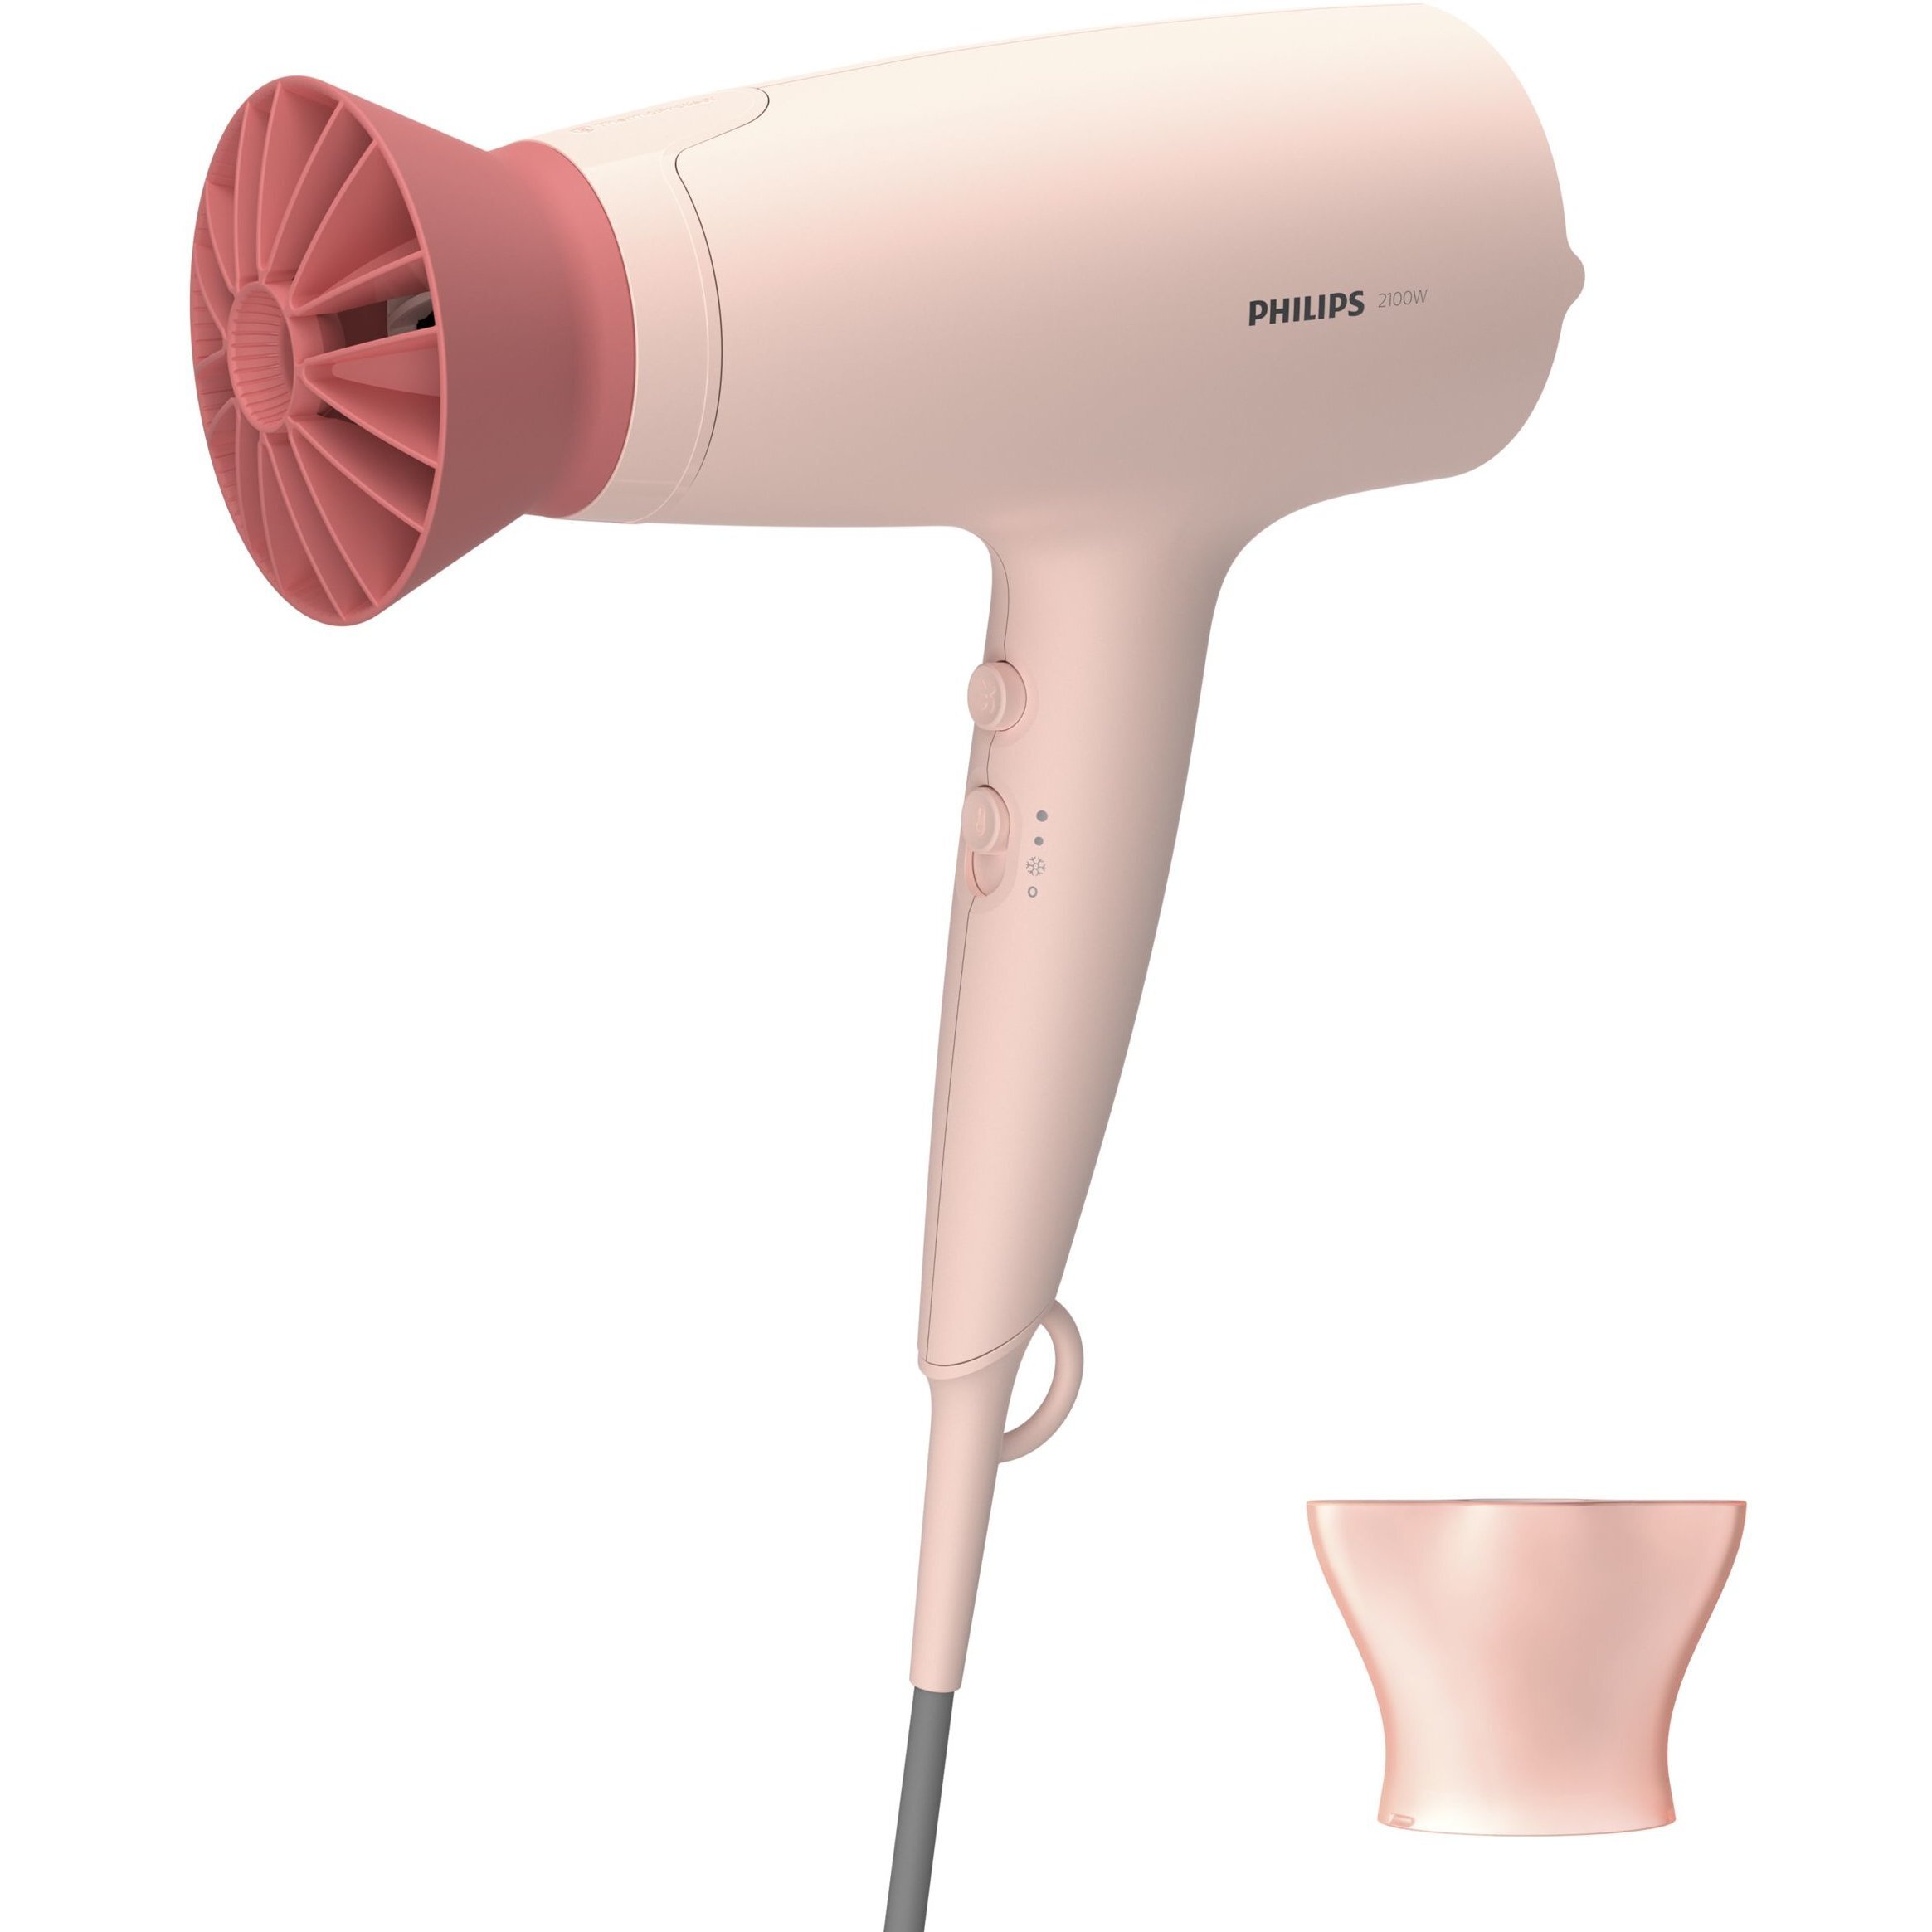 BHD342 stores Kyiv, Philips > specifications in Series 3000 price hair Odessa Ukraine: buy Dnepropetrovsk, prices, reviews, - Lviv, dryer: (BHD342/10)